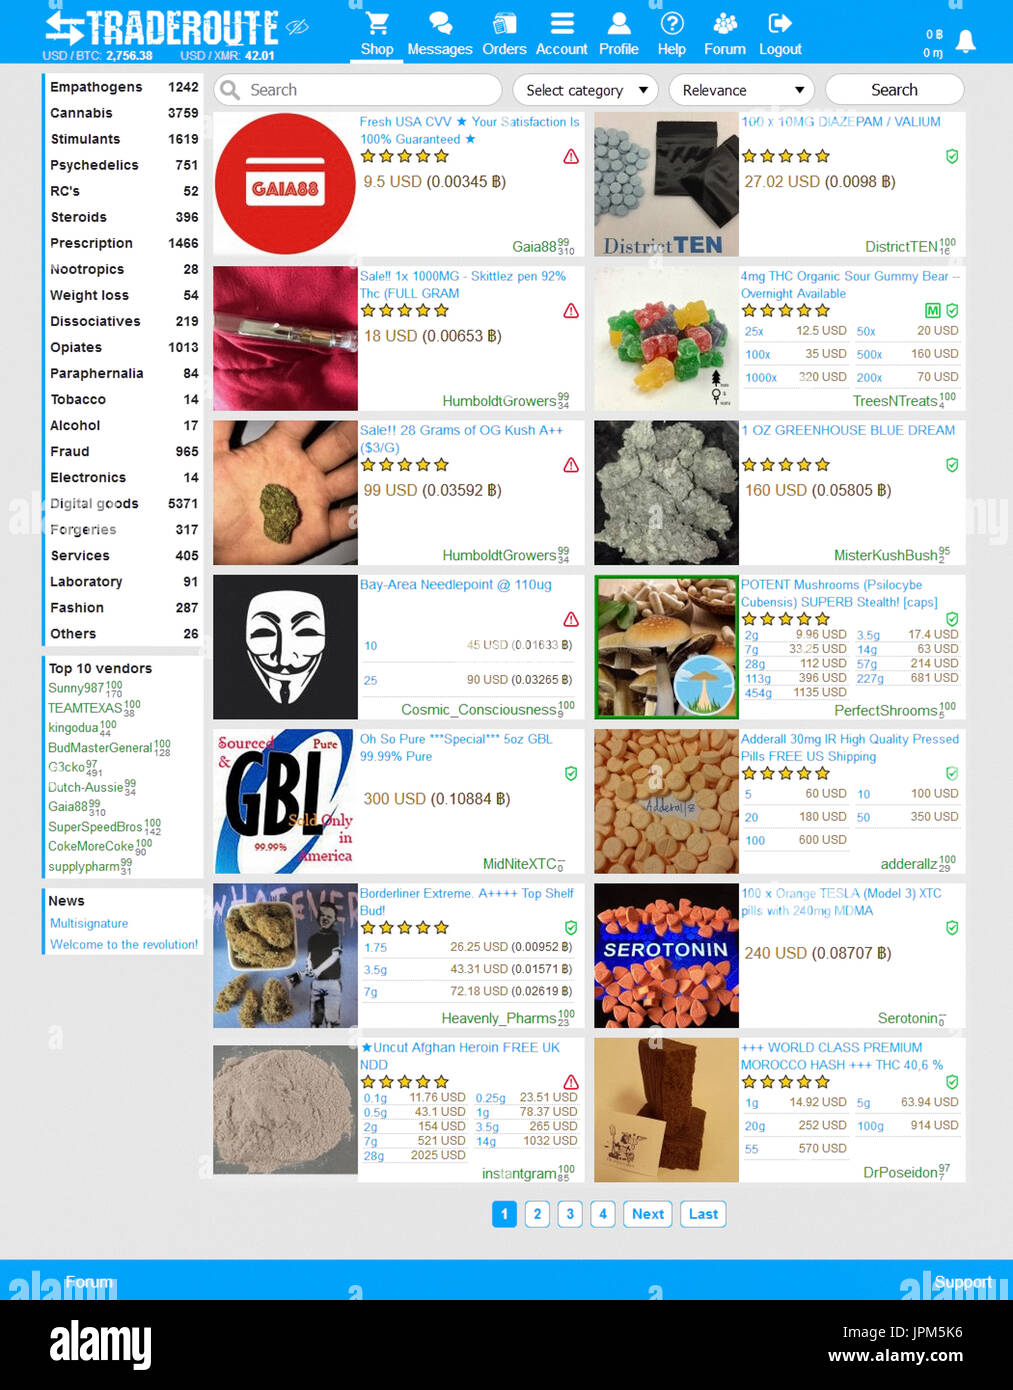 TradeRoute Marketplace for illicit goods (drugs, counterfeits, fraudulent services and supplies) accessed through the darknet (Tor network). Homepage showing categories of items sold with images of various items on offer. TradeRoute was established in 2016. Stock Photo